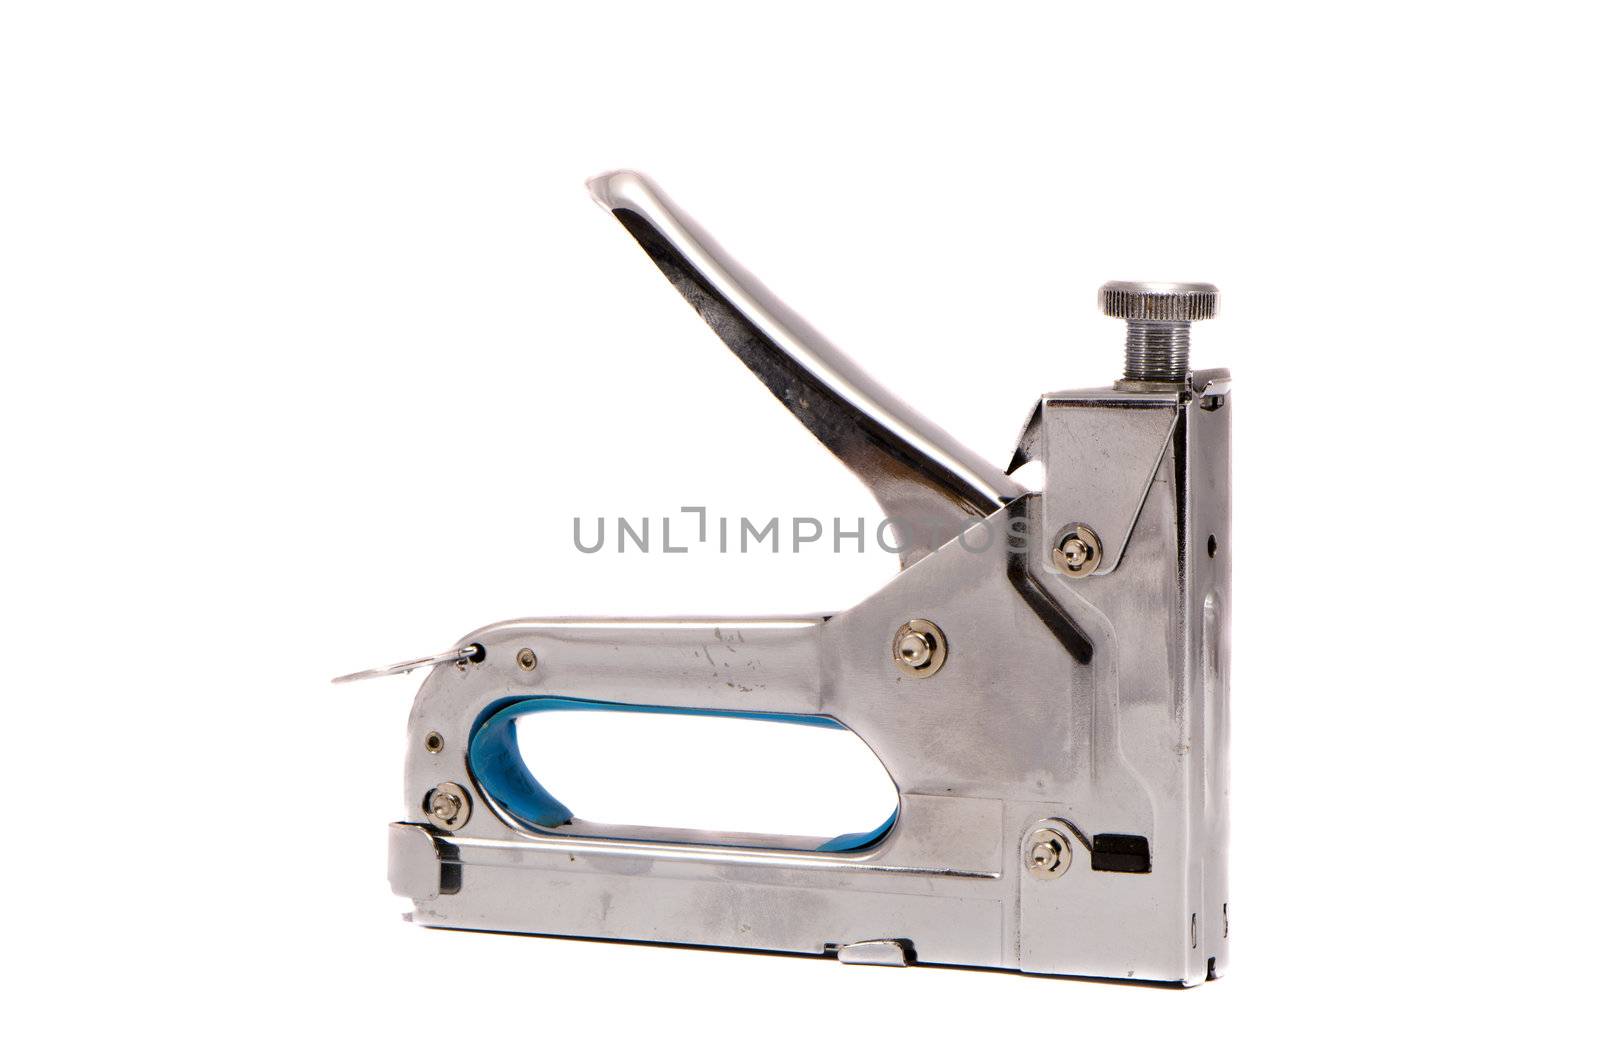 Special tool stapler for paper or other thin material fixing to wooden objects. Modern hammer with nails used in construction isolated on a white background.